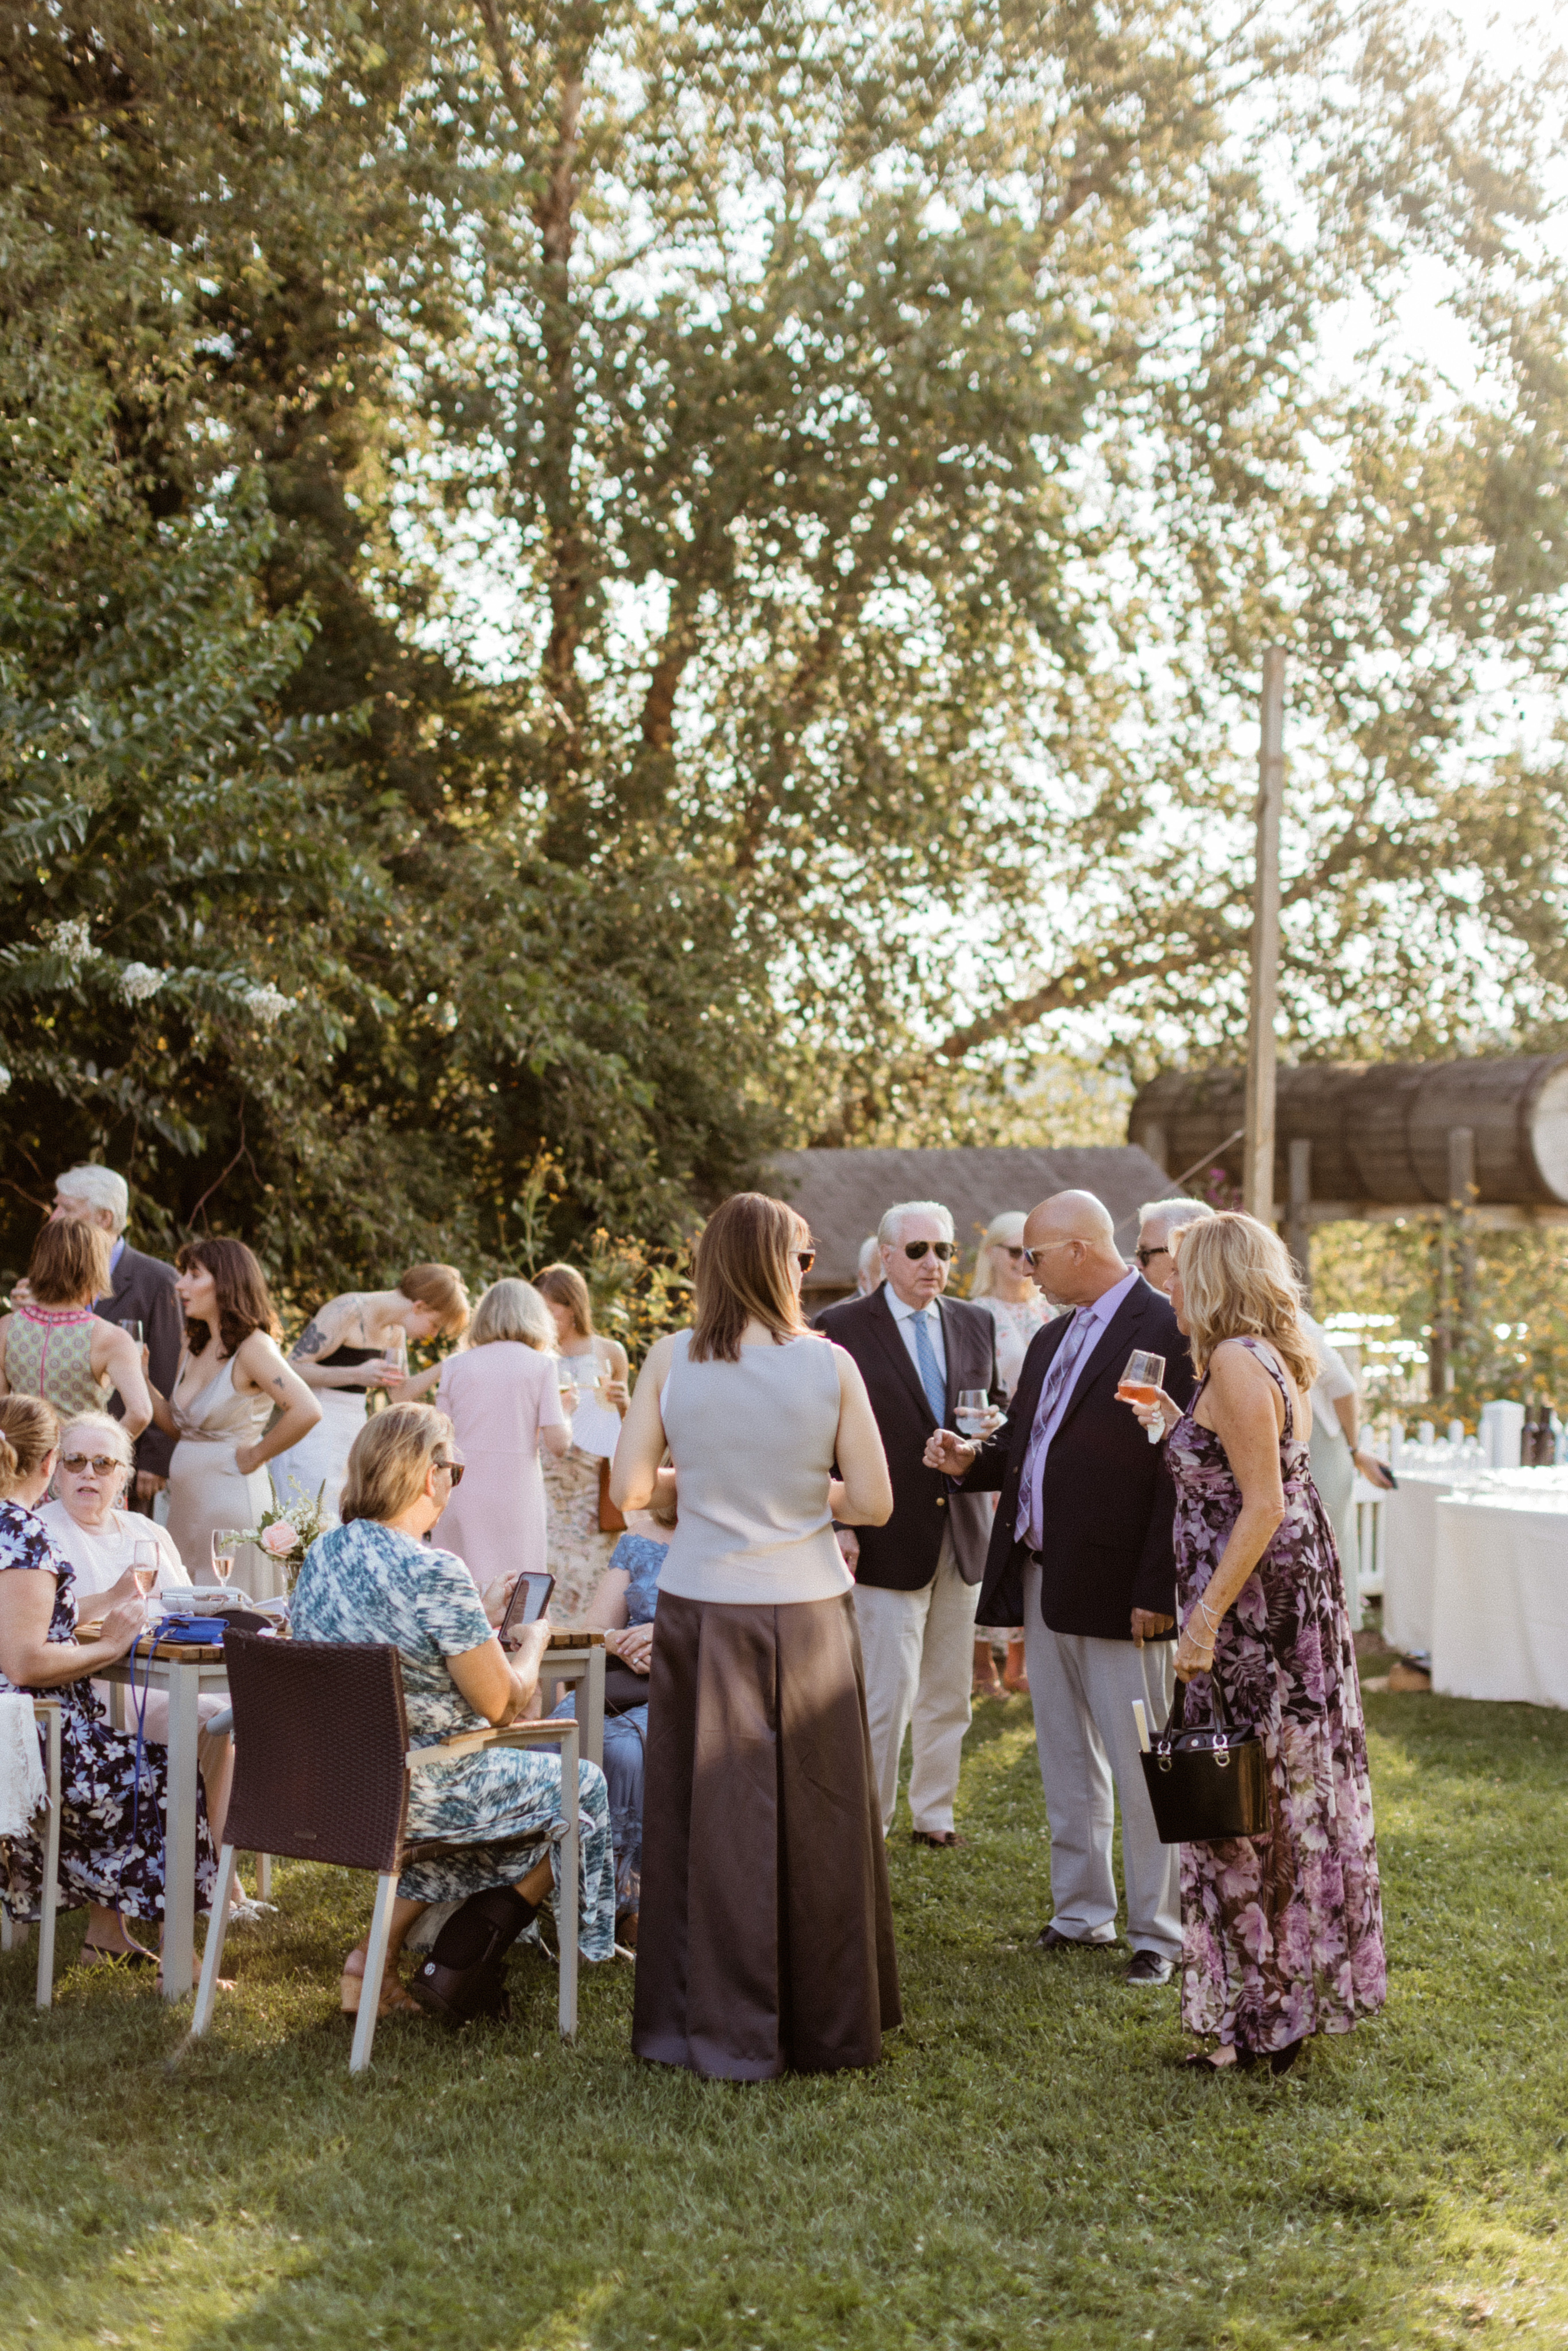 Guests mingle during the cocktail hour on the stunning New York wedding venue